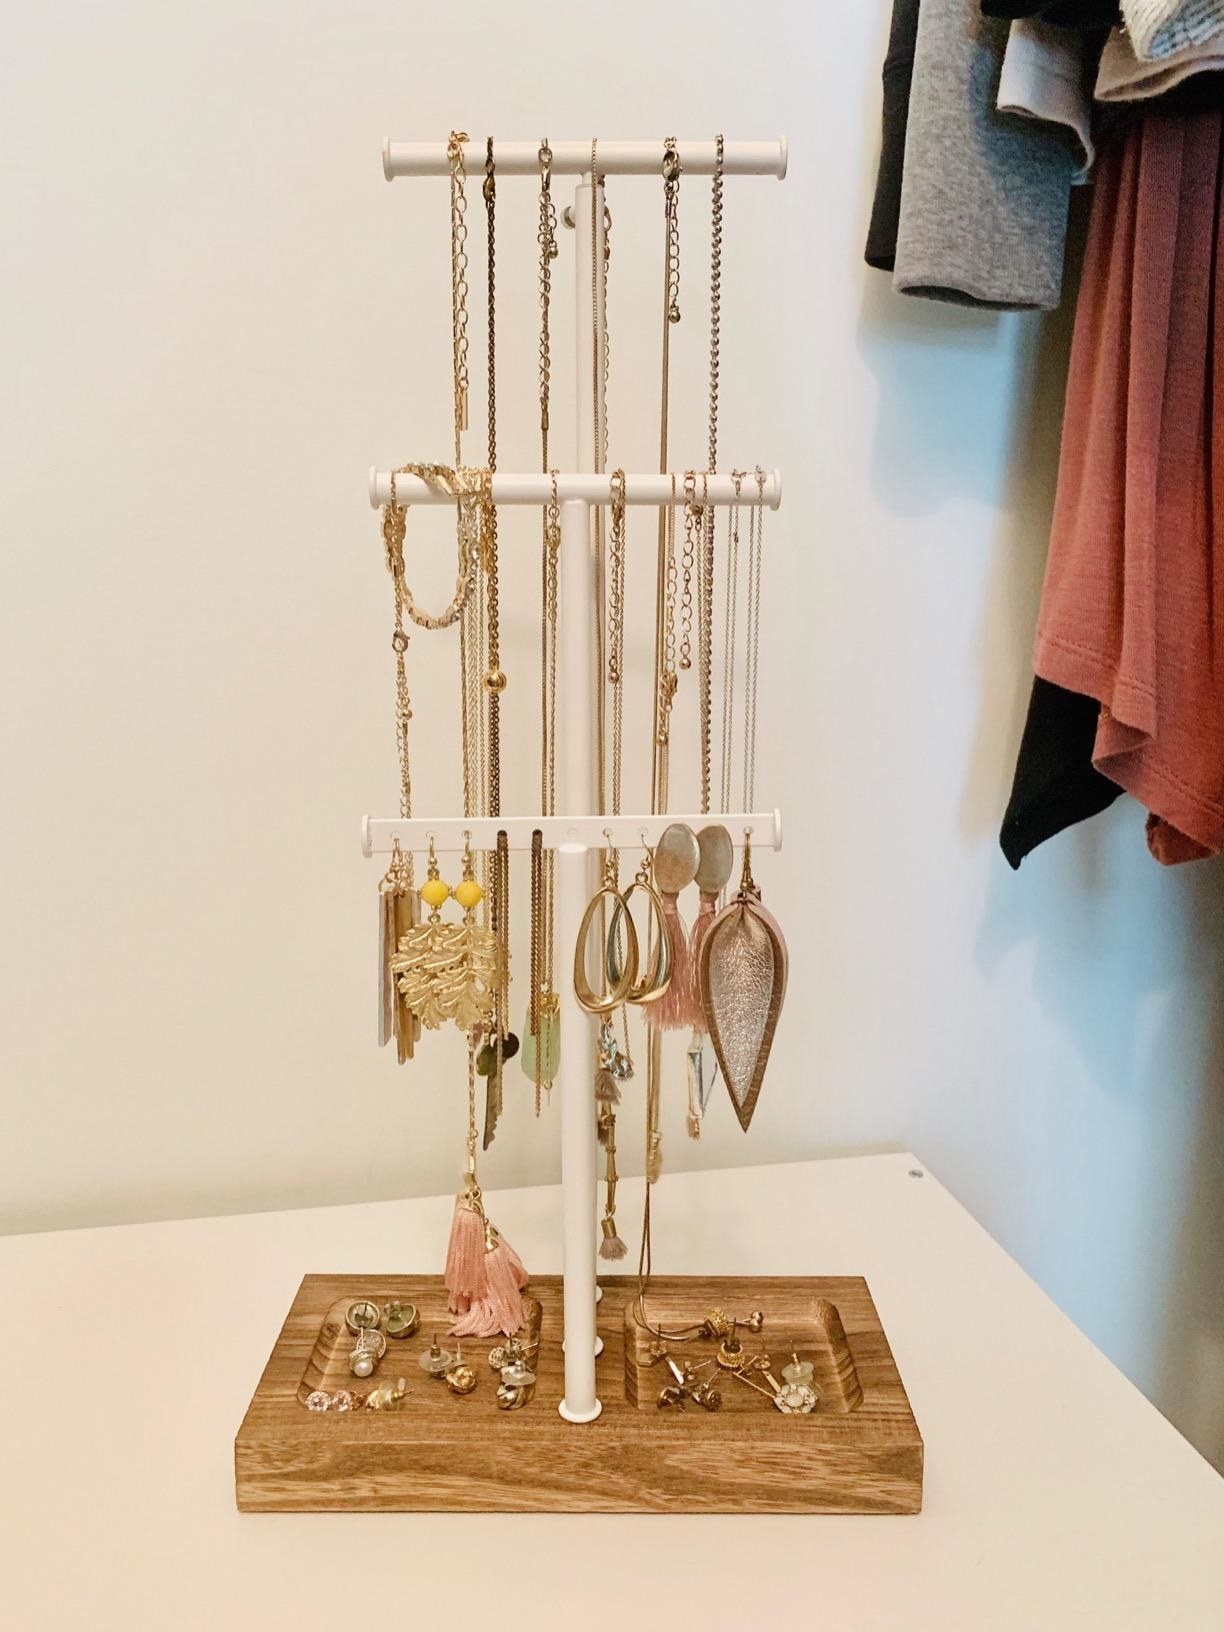 reviewer&#x27;s photo of their necklaces, bracelets, and earrings hung on the three-rung jewelry stand